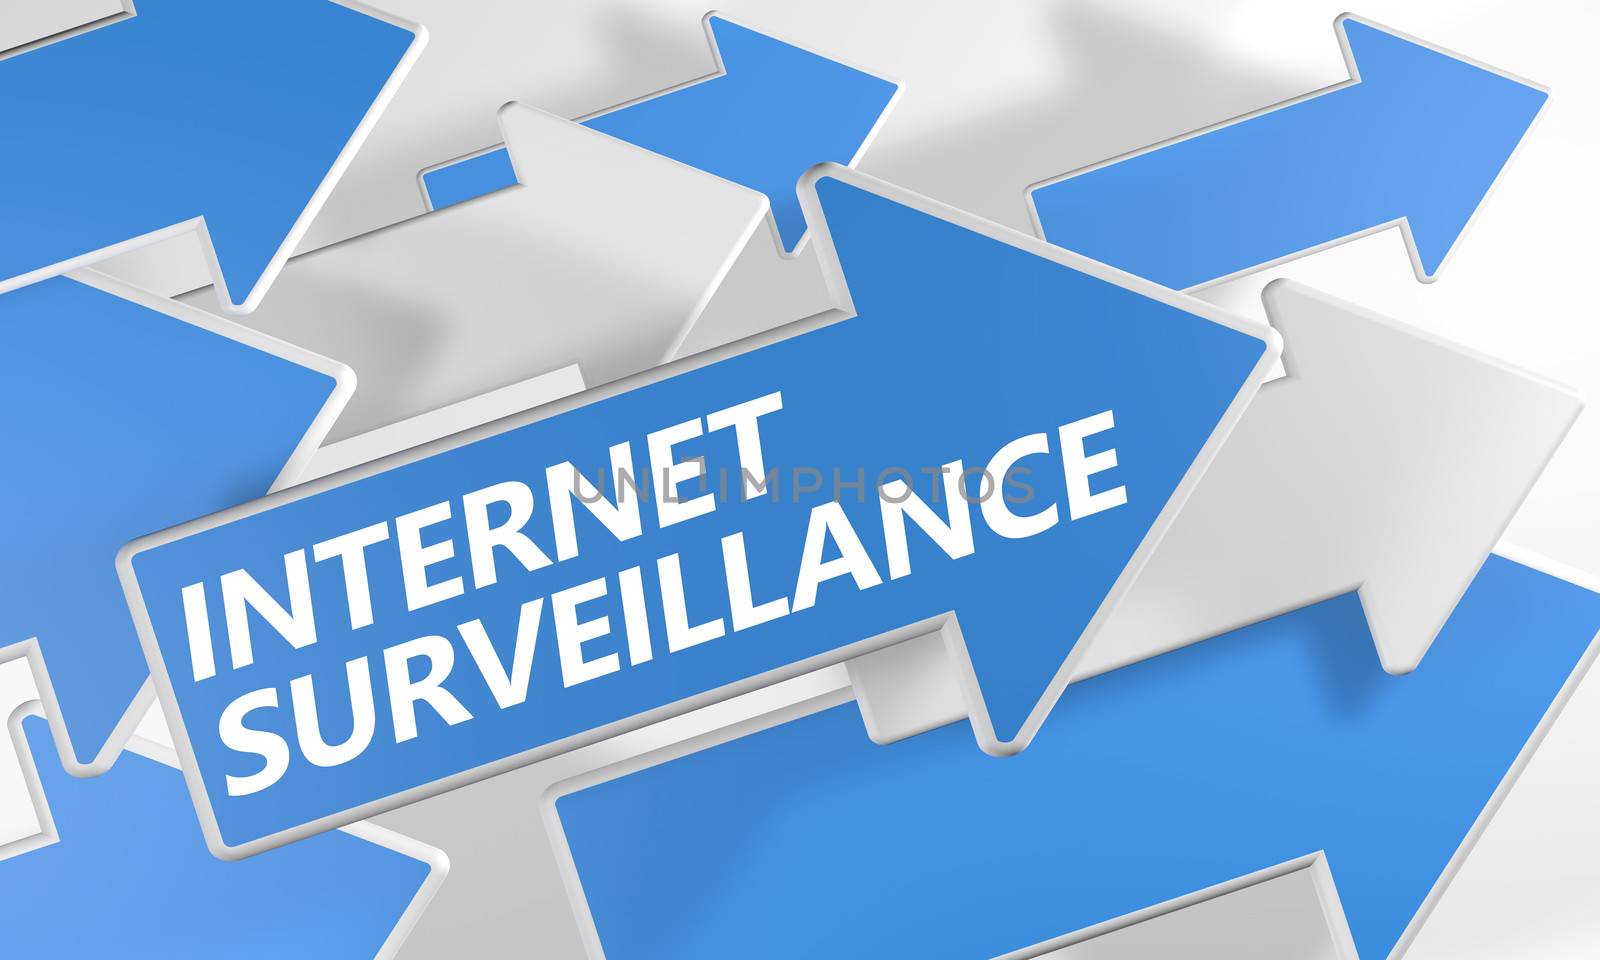 Internet surveillance 3d render concept with blue and white arrows flying over a white background.